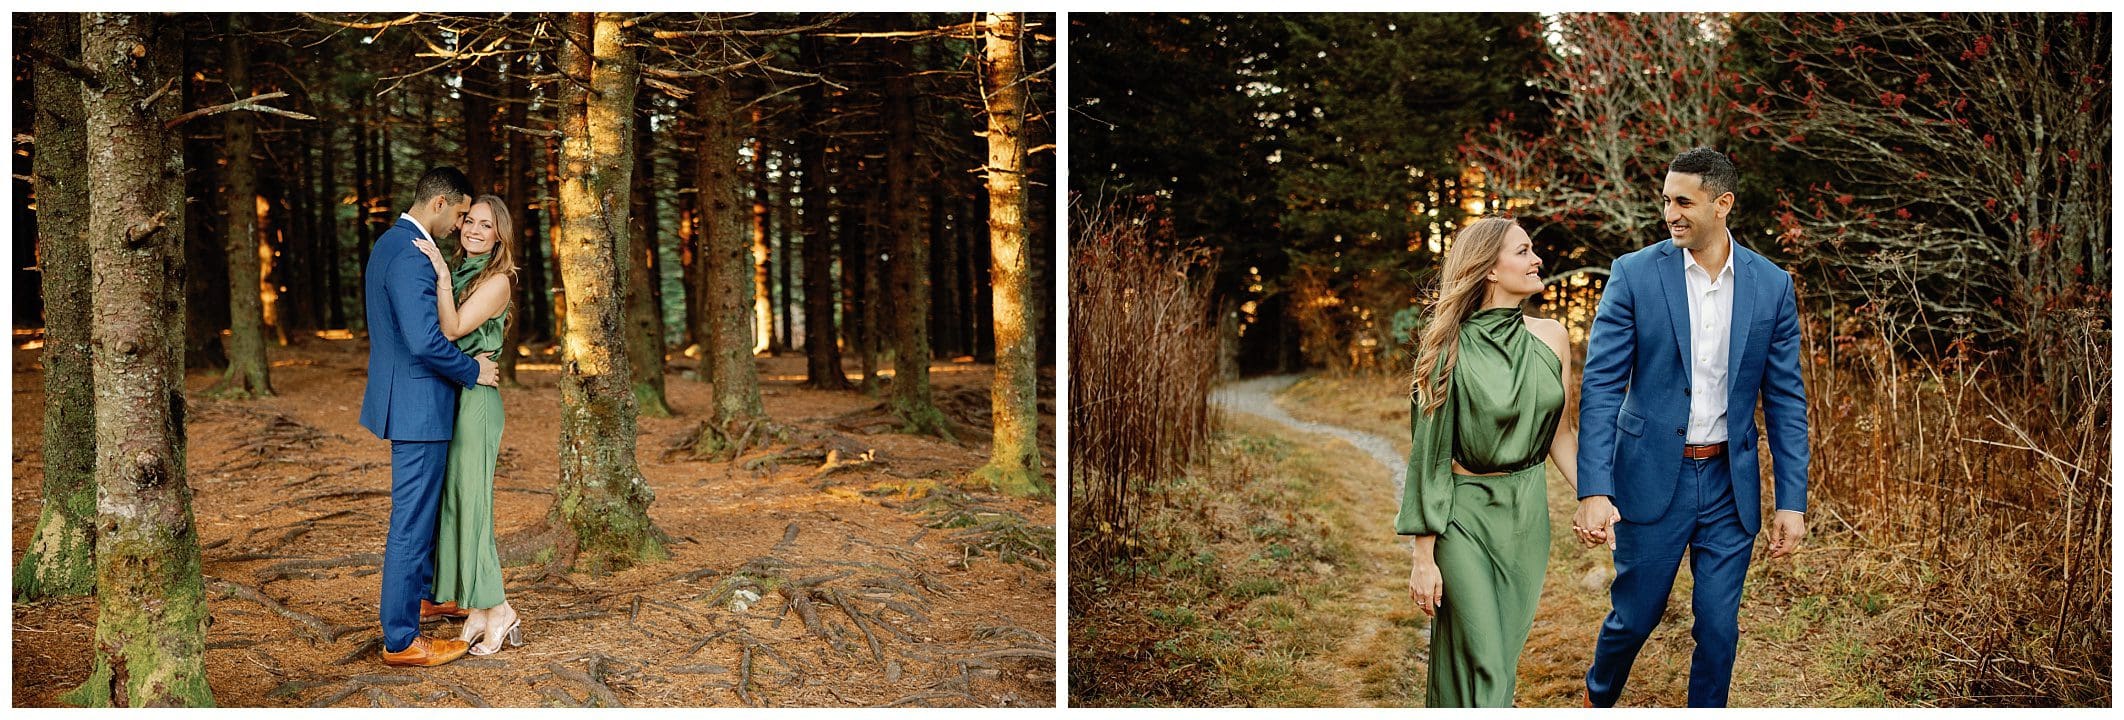 A couple engaging in a romantic sunrise engagement photo shoot in a Black Balsam forest setting, with the left image showing an embrace against a tree and the right image capturing a candid moment as they walk